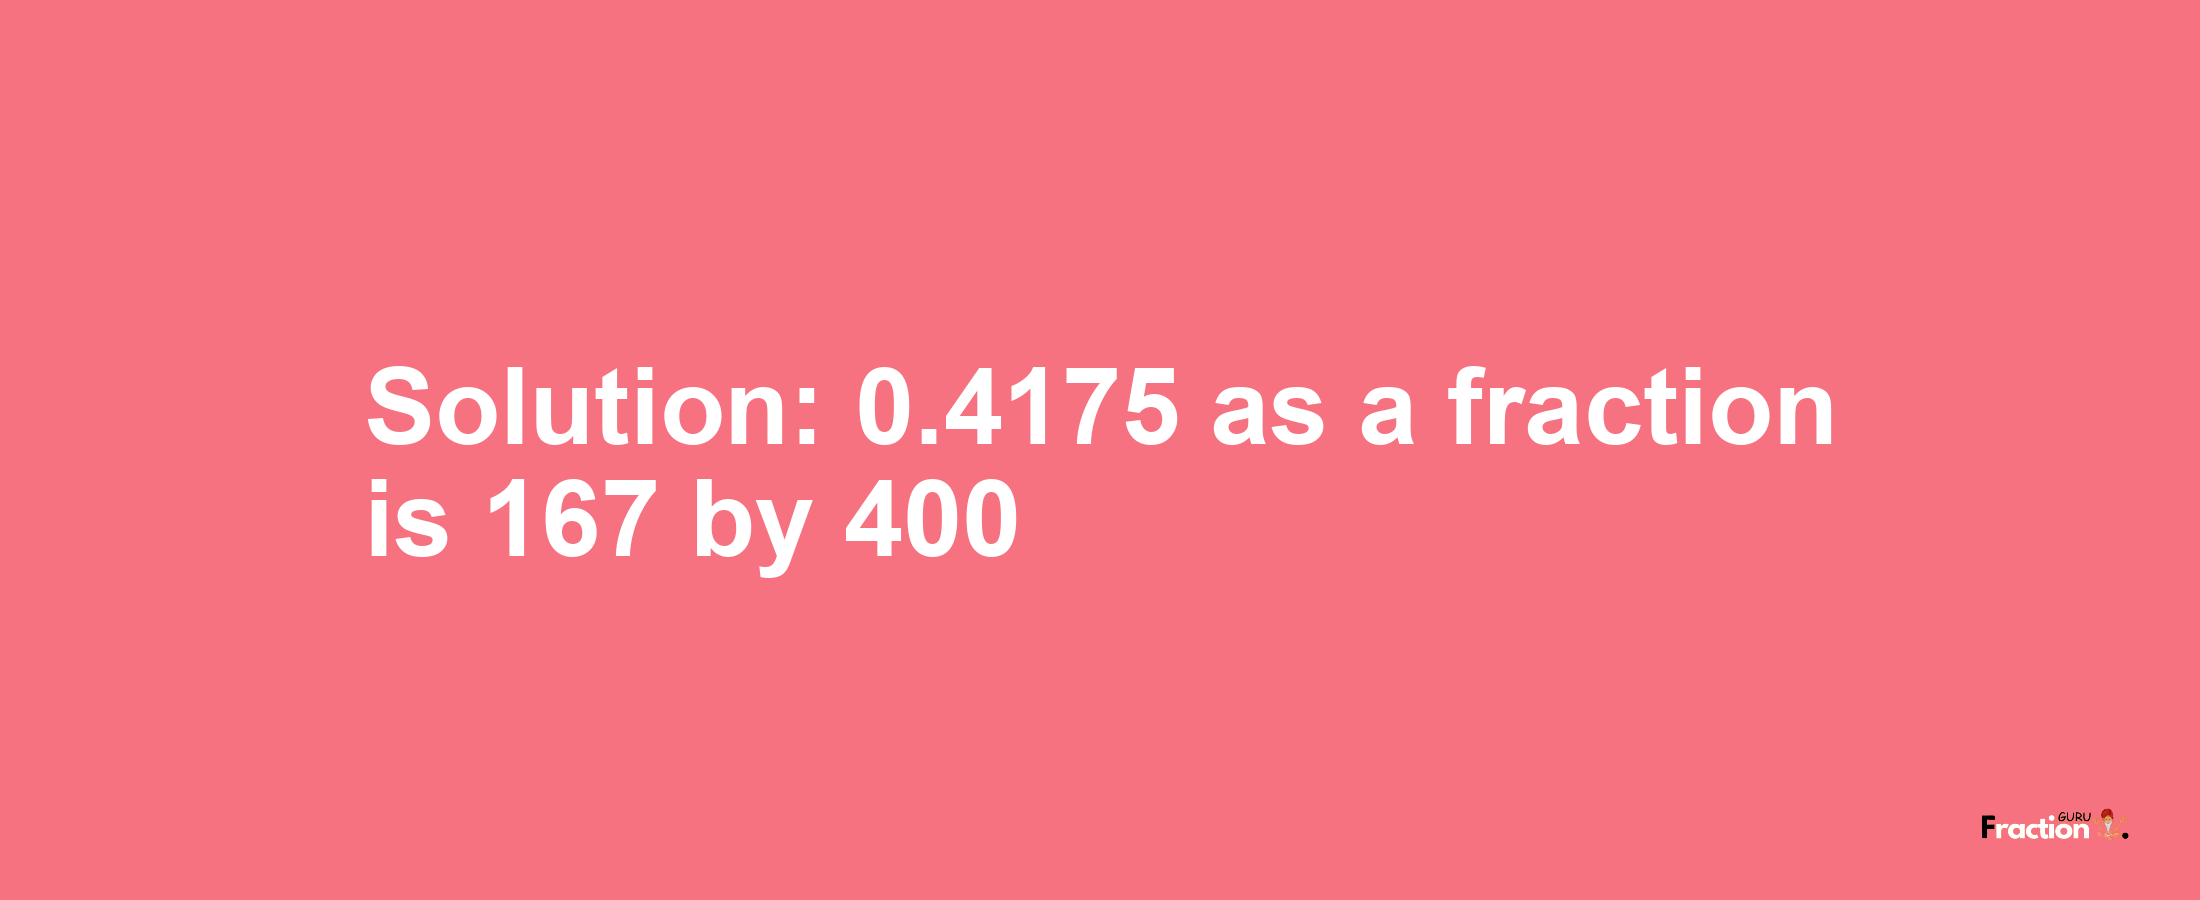 Solution:0.4175 as a fraction is 167/400